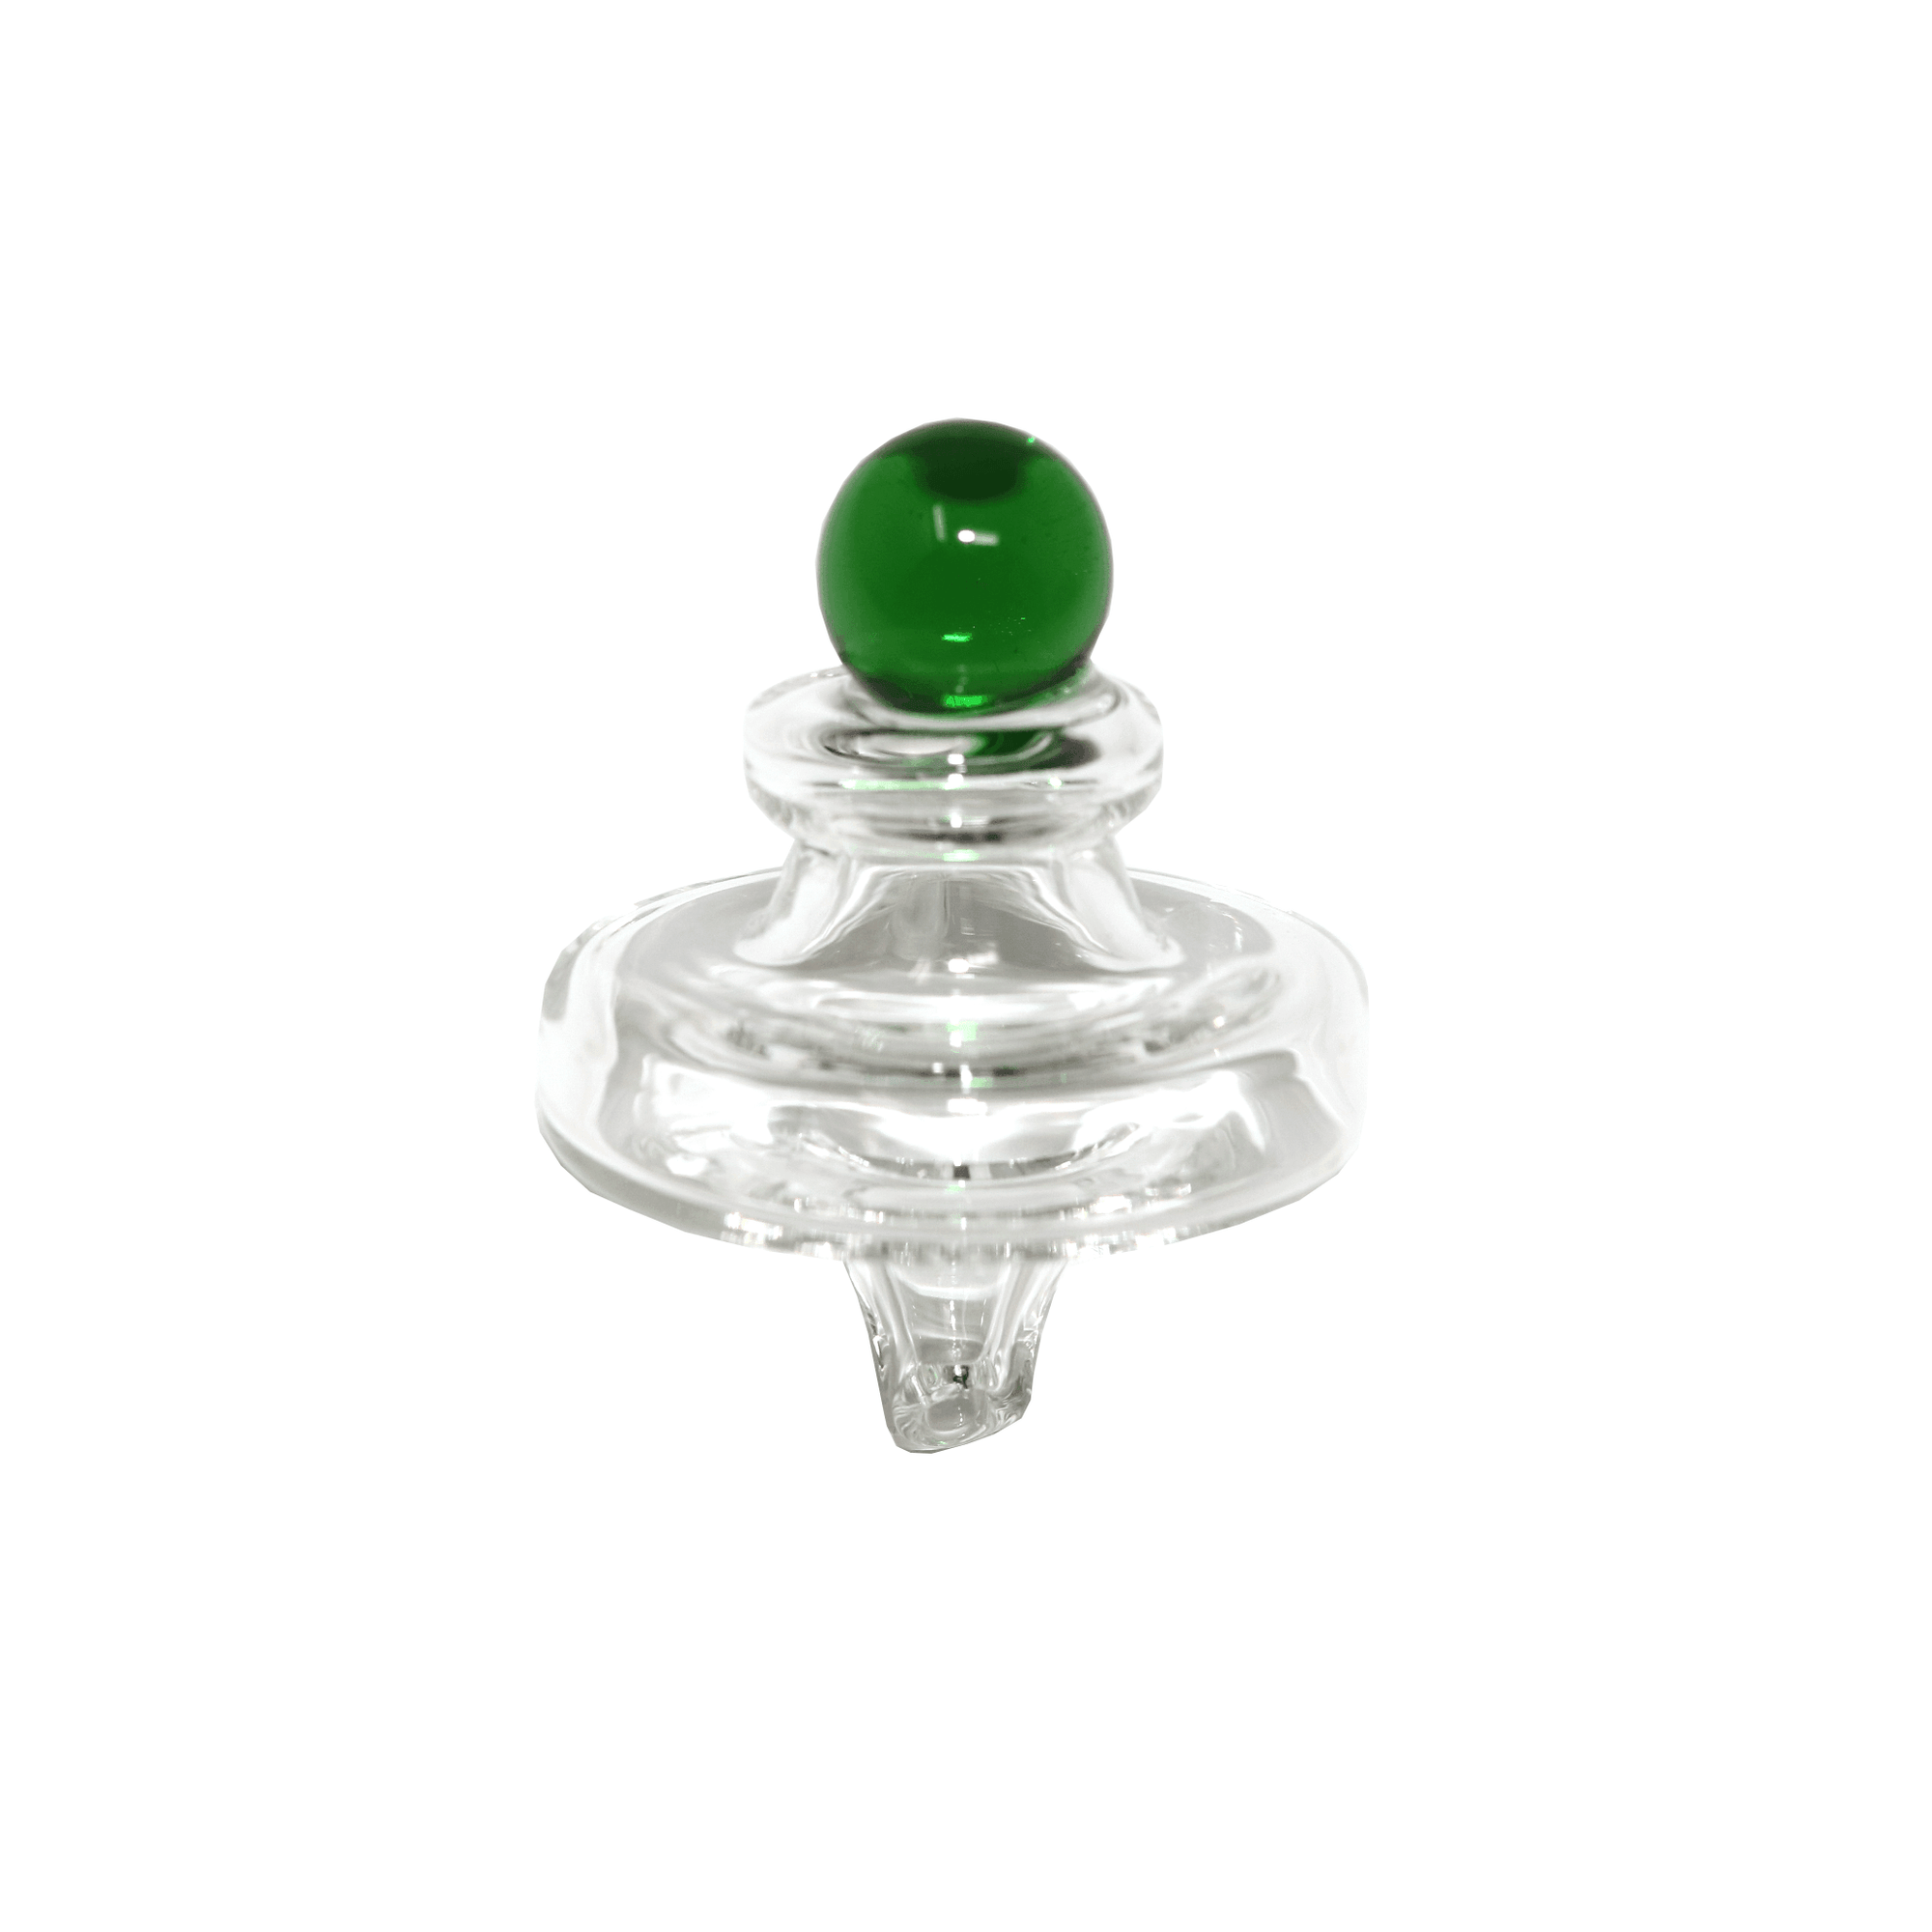 Flat Top Quartz Banger 14mm Female With Cup Insert and Saucer Cap | Carb Cap View | TDS